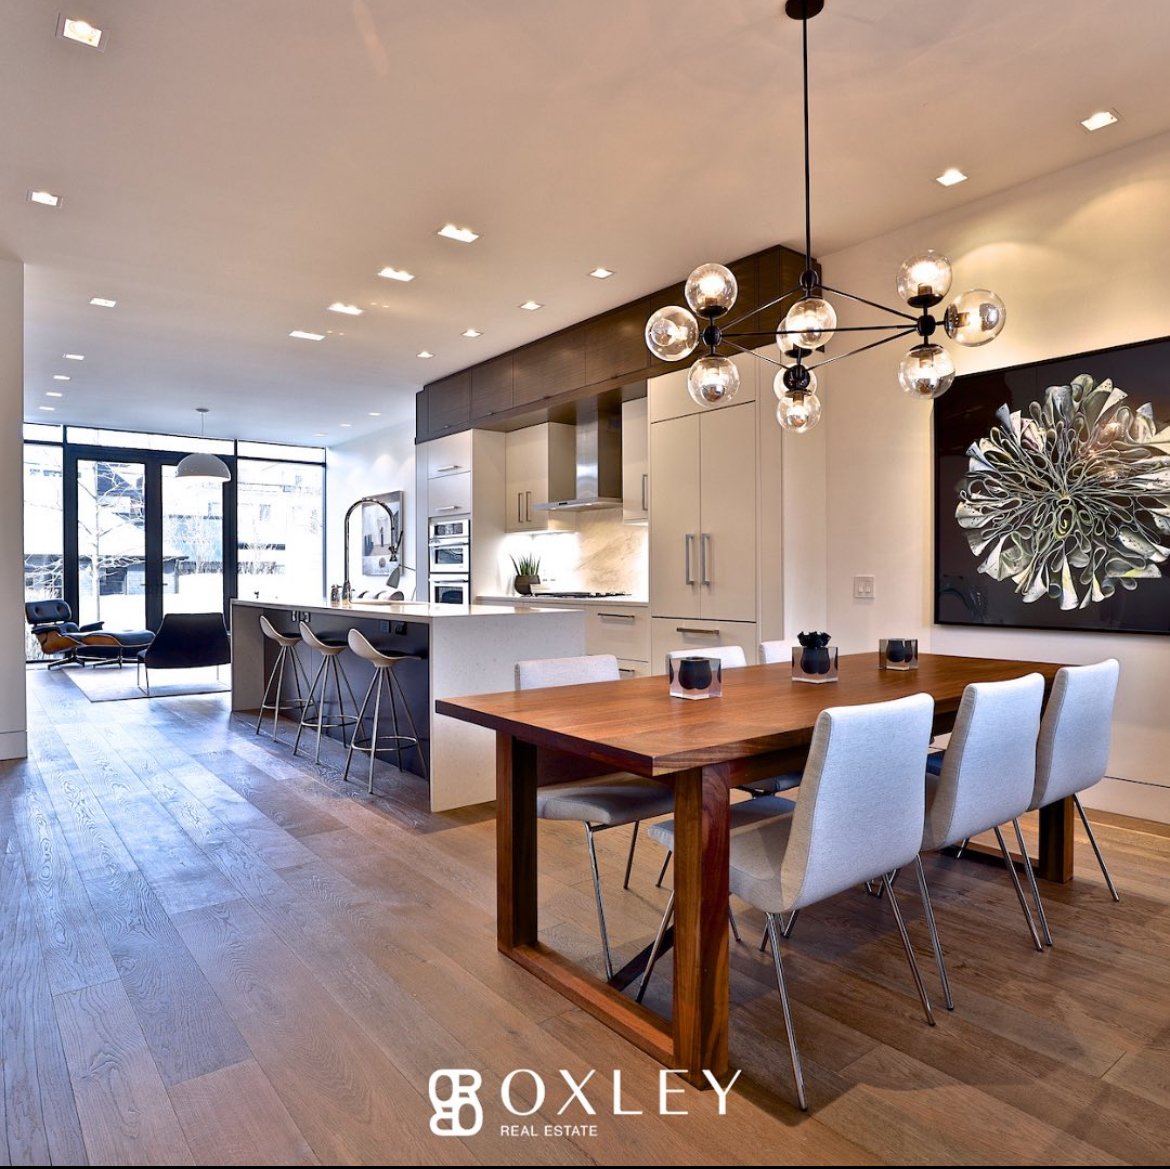  Image from @  oxleyrealestate     on Instagram 